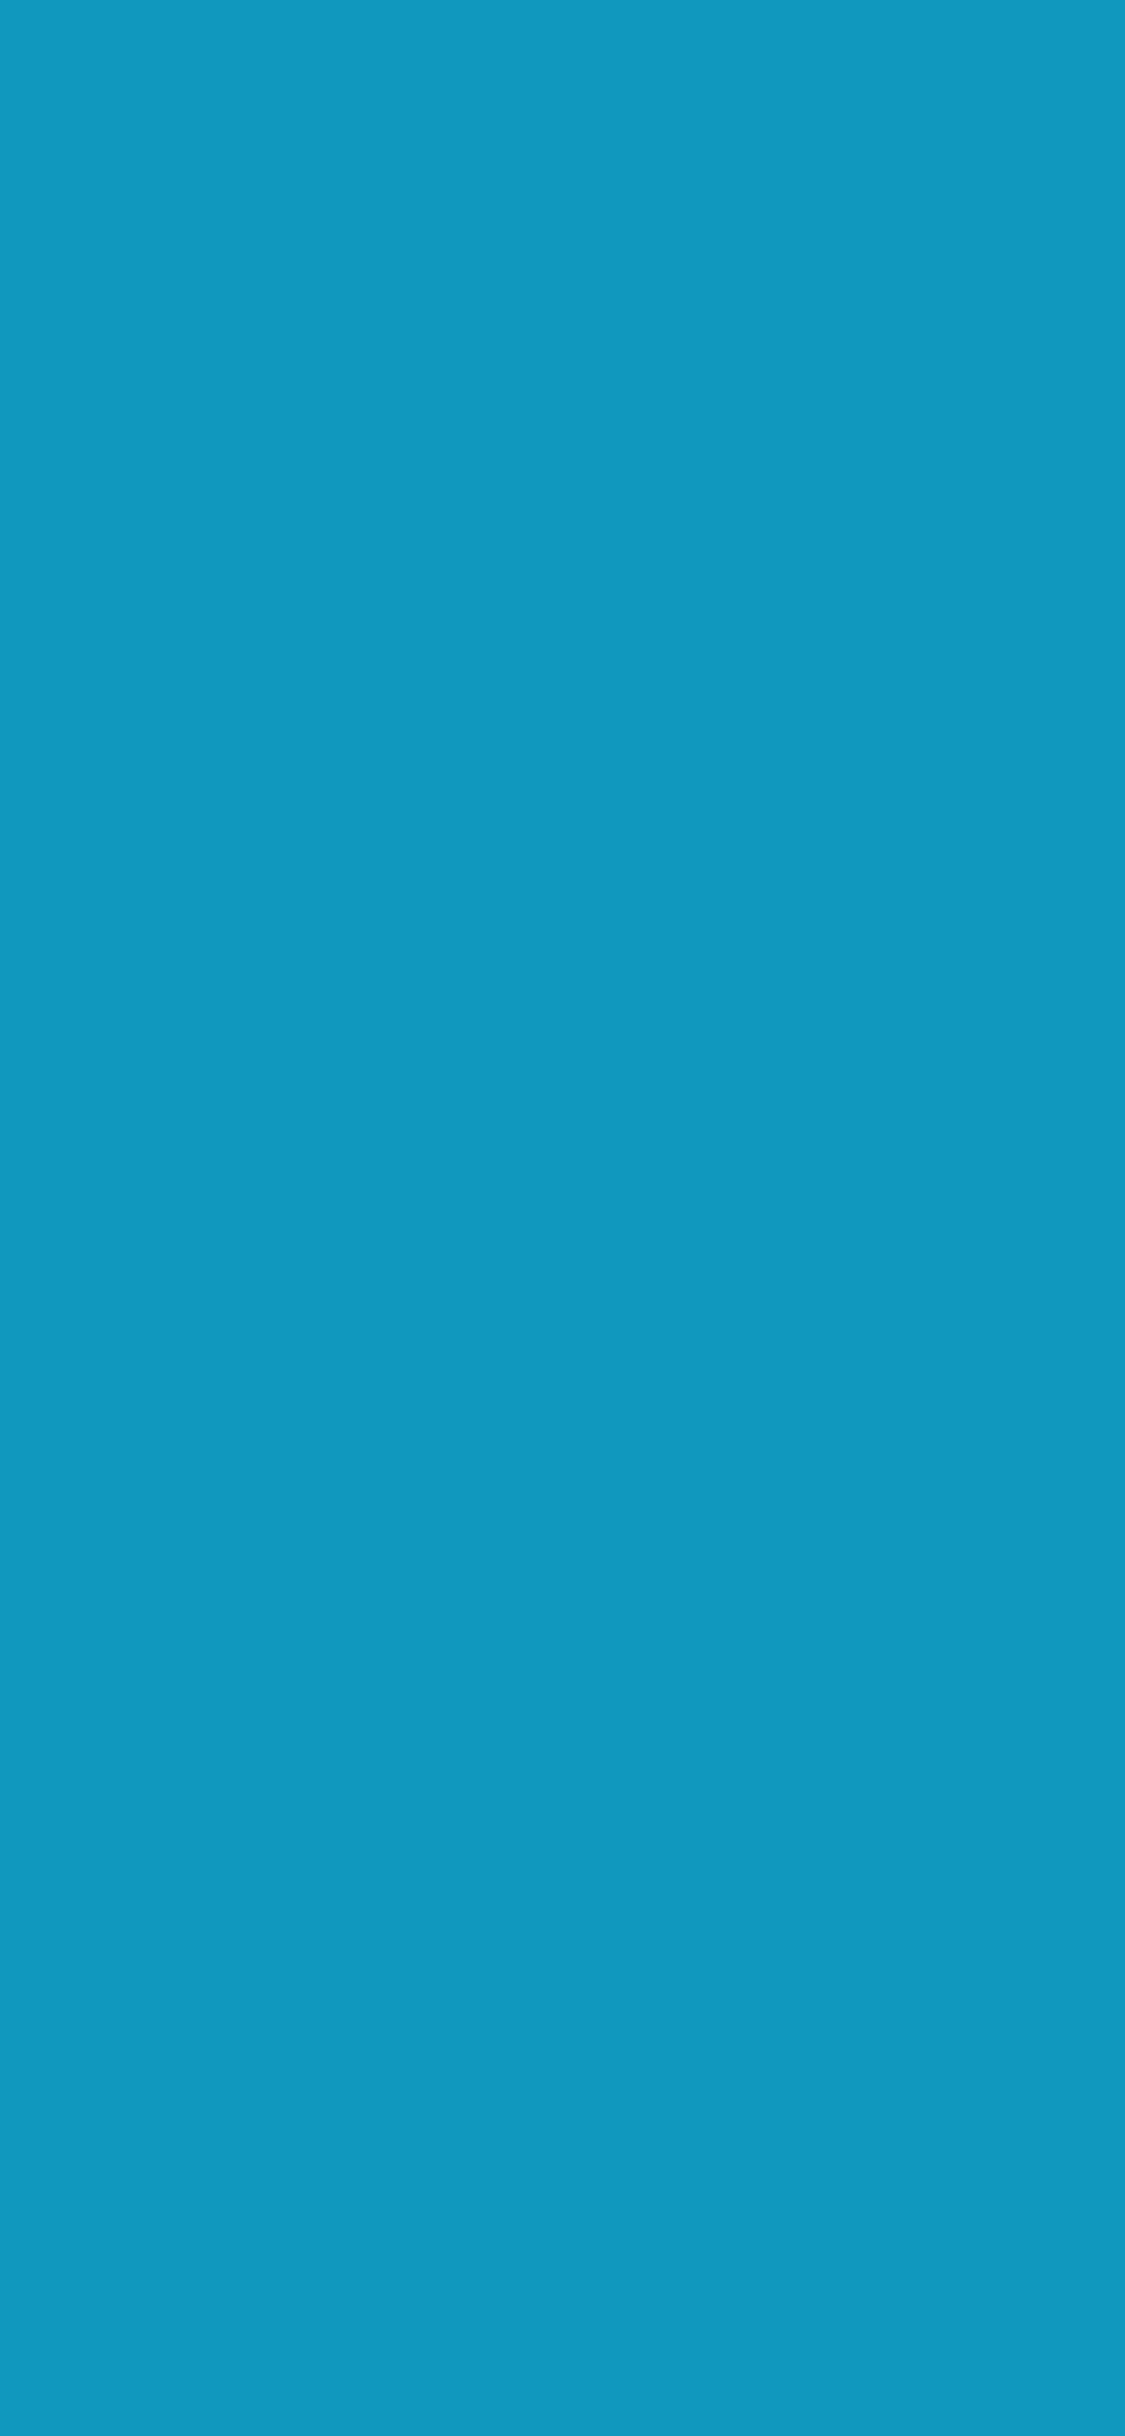 1125x2436 Blue-green Solid Color Background